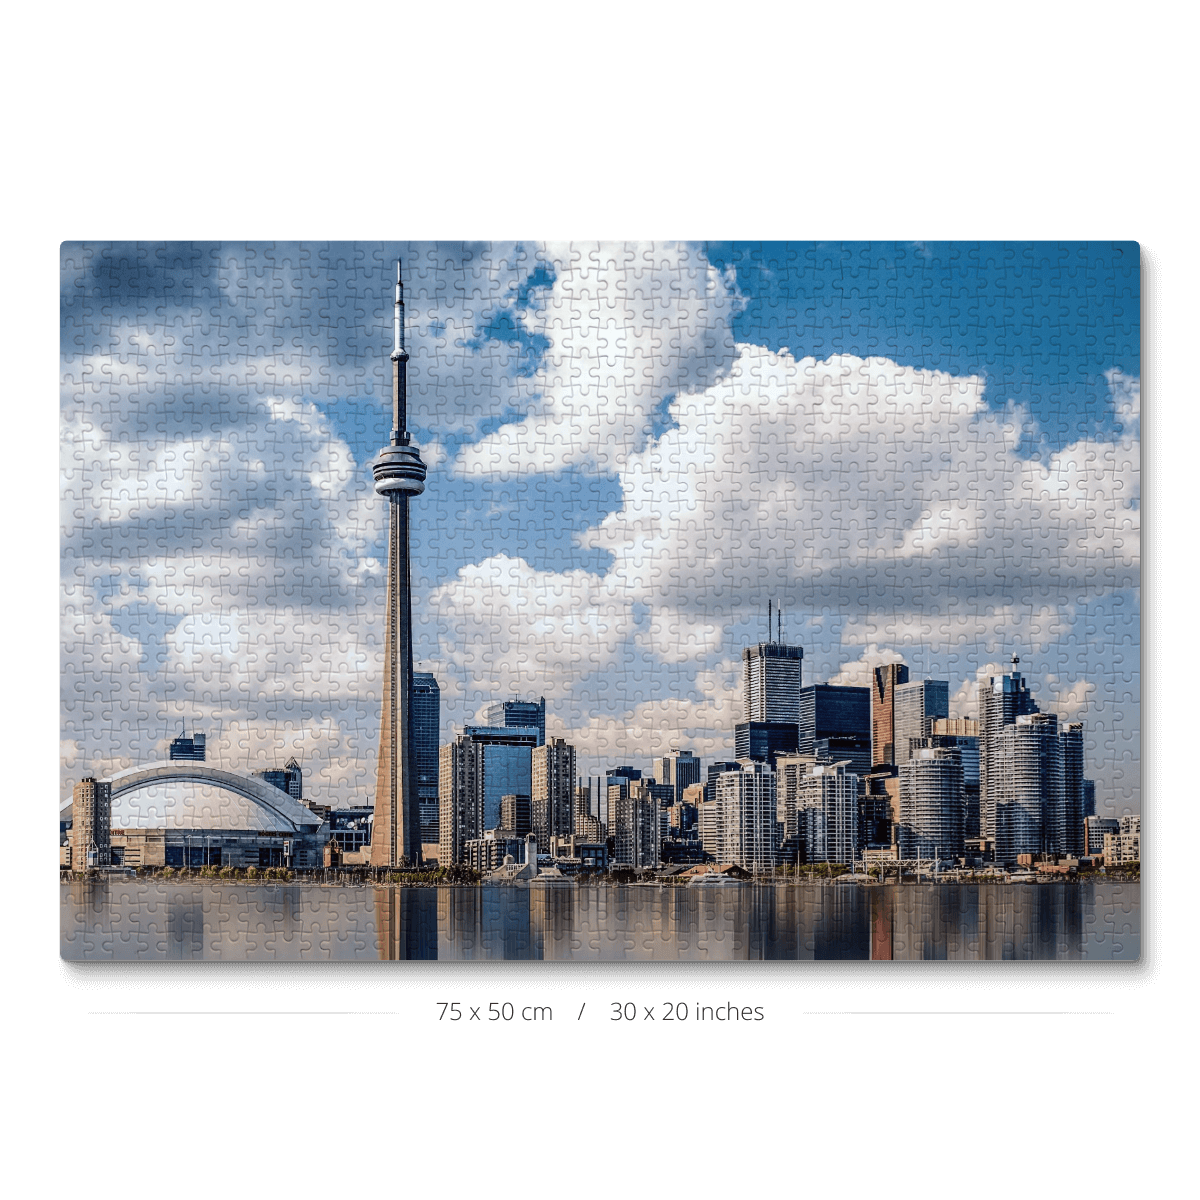 A 1000-piece jigsaw puzzle featuring the CN Tower and Toronto skyline.